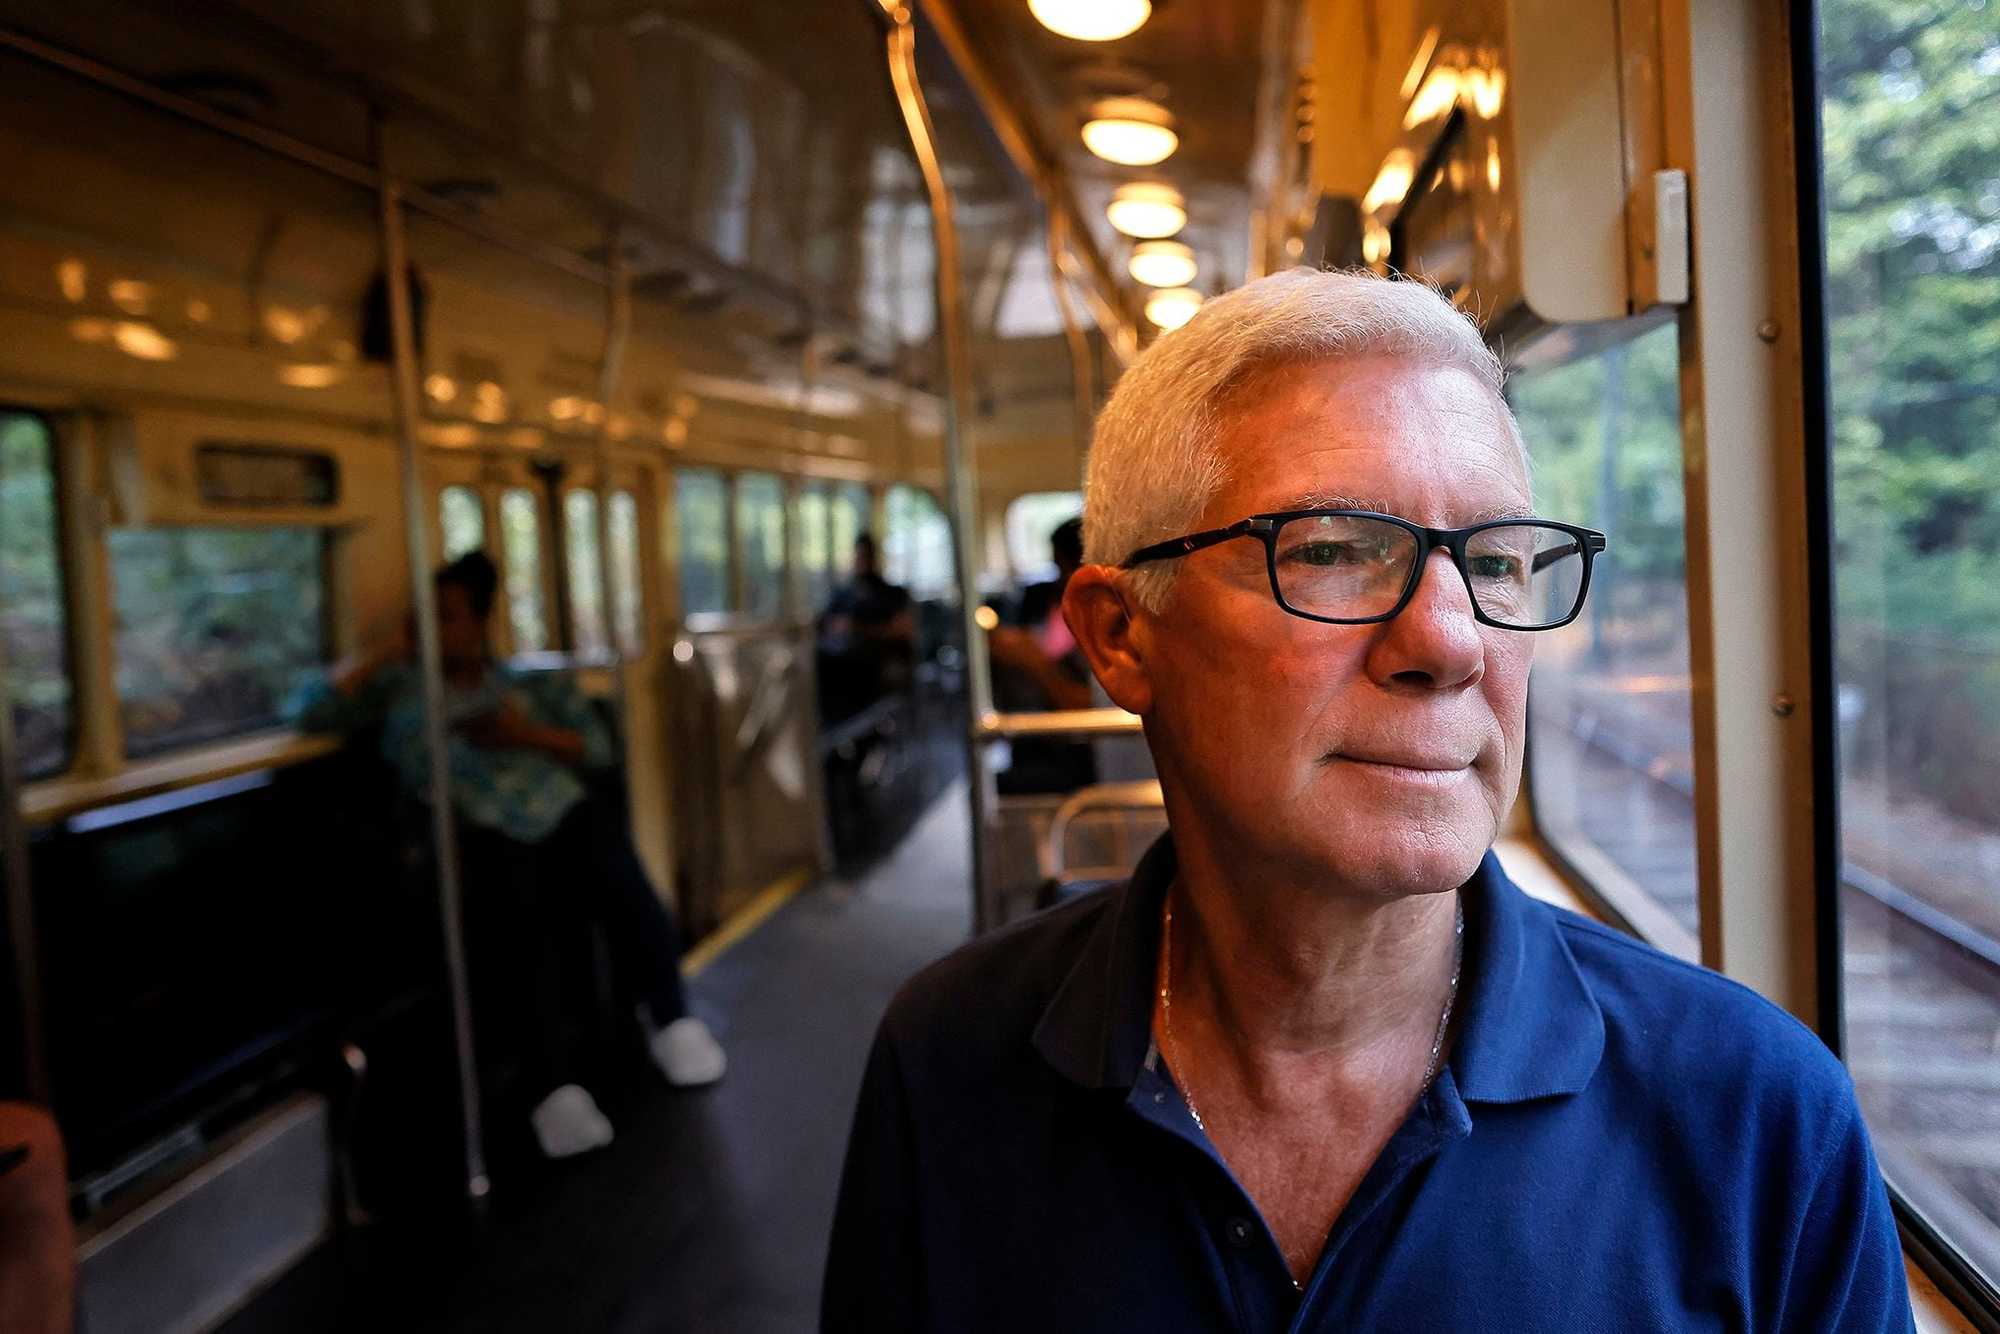 Brian O'Halloran, of Milton, is concerned about the ramifications of a state law requiring new zoning in towns served by the MBTA. He is pictured riding the Mattapan Trolley, the rail service that brings Milton under the law's mandates.